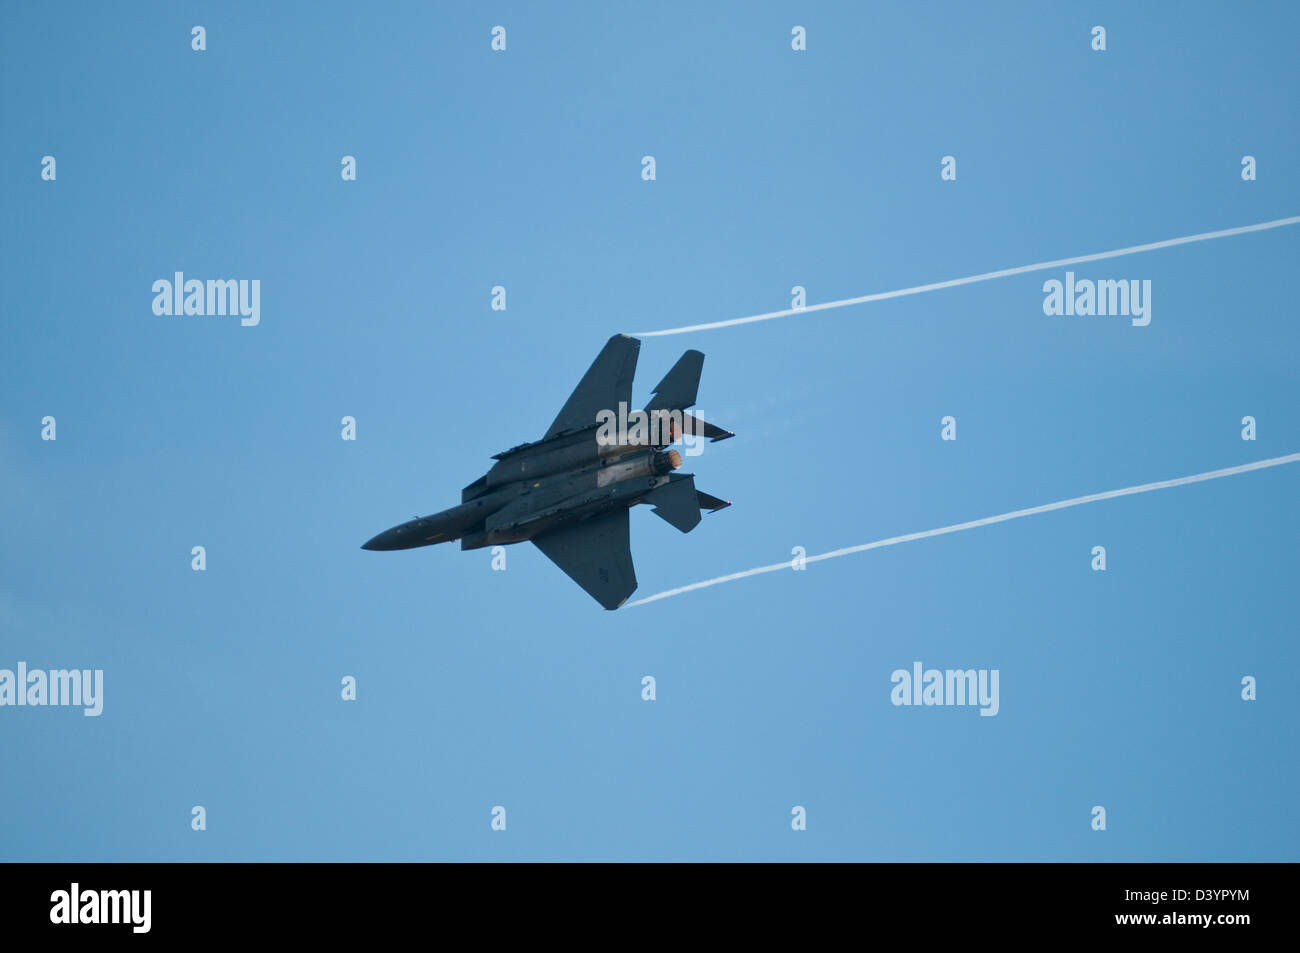 A modern military F15 jet fighter shown flying at speed. Stock Photo